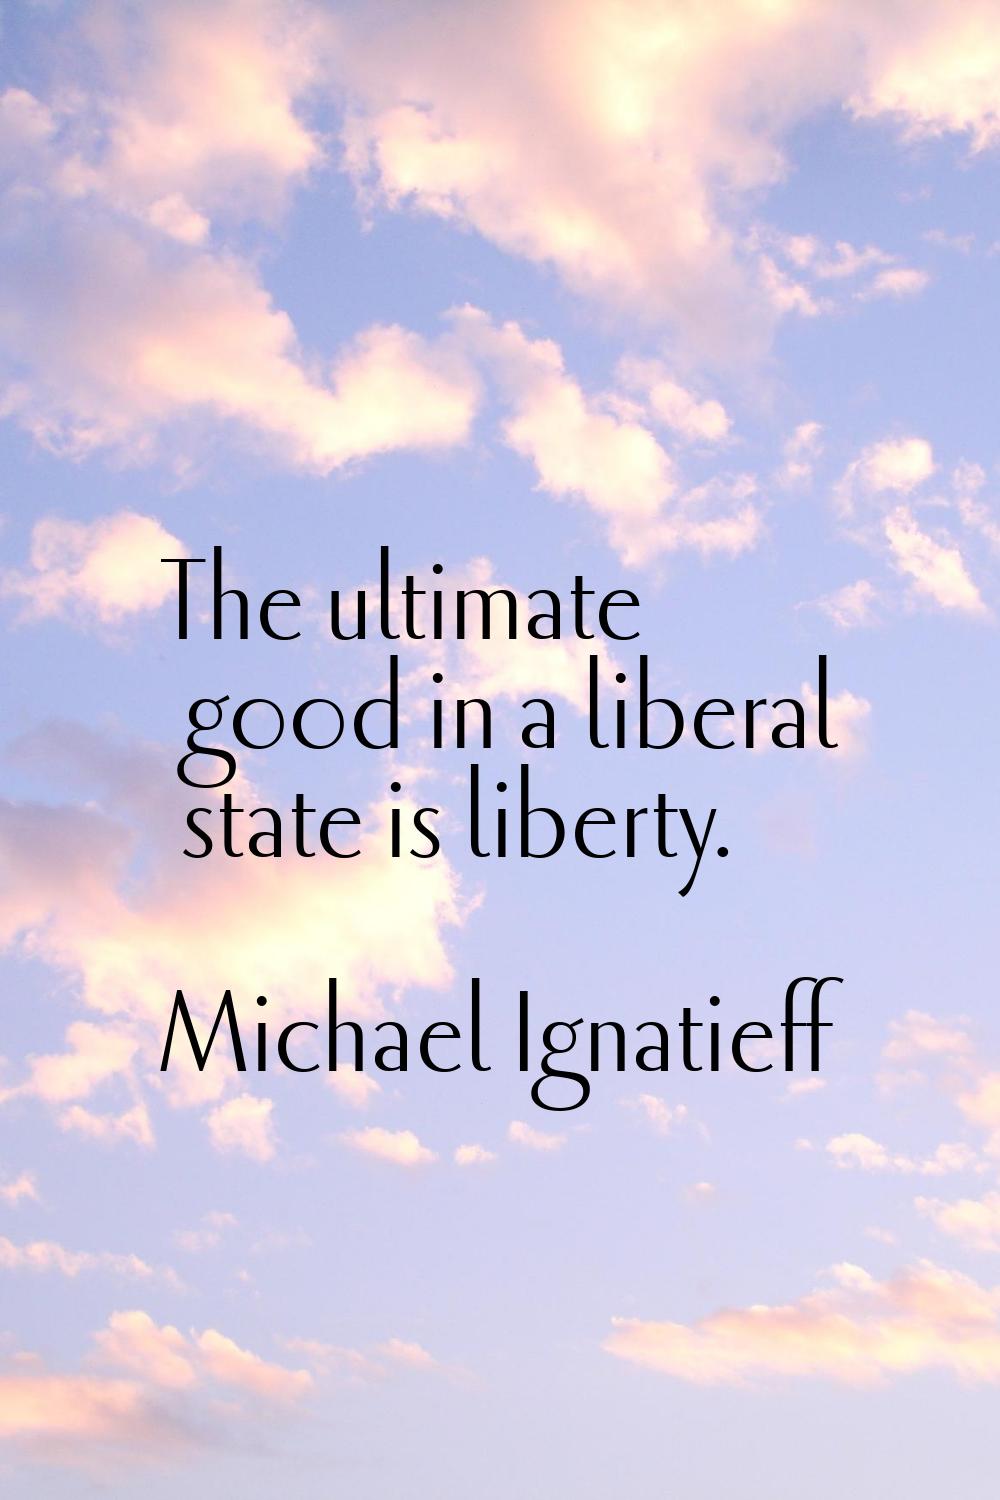 The ultimate good in a liberal state is liberty.